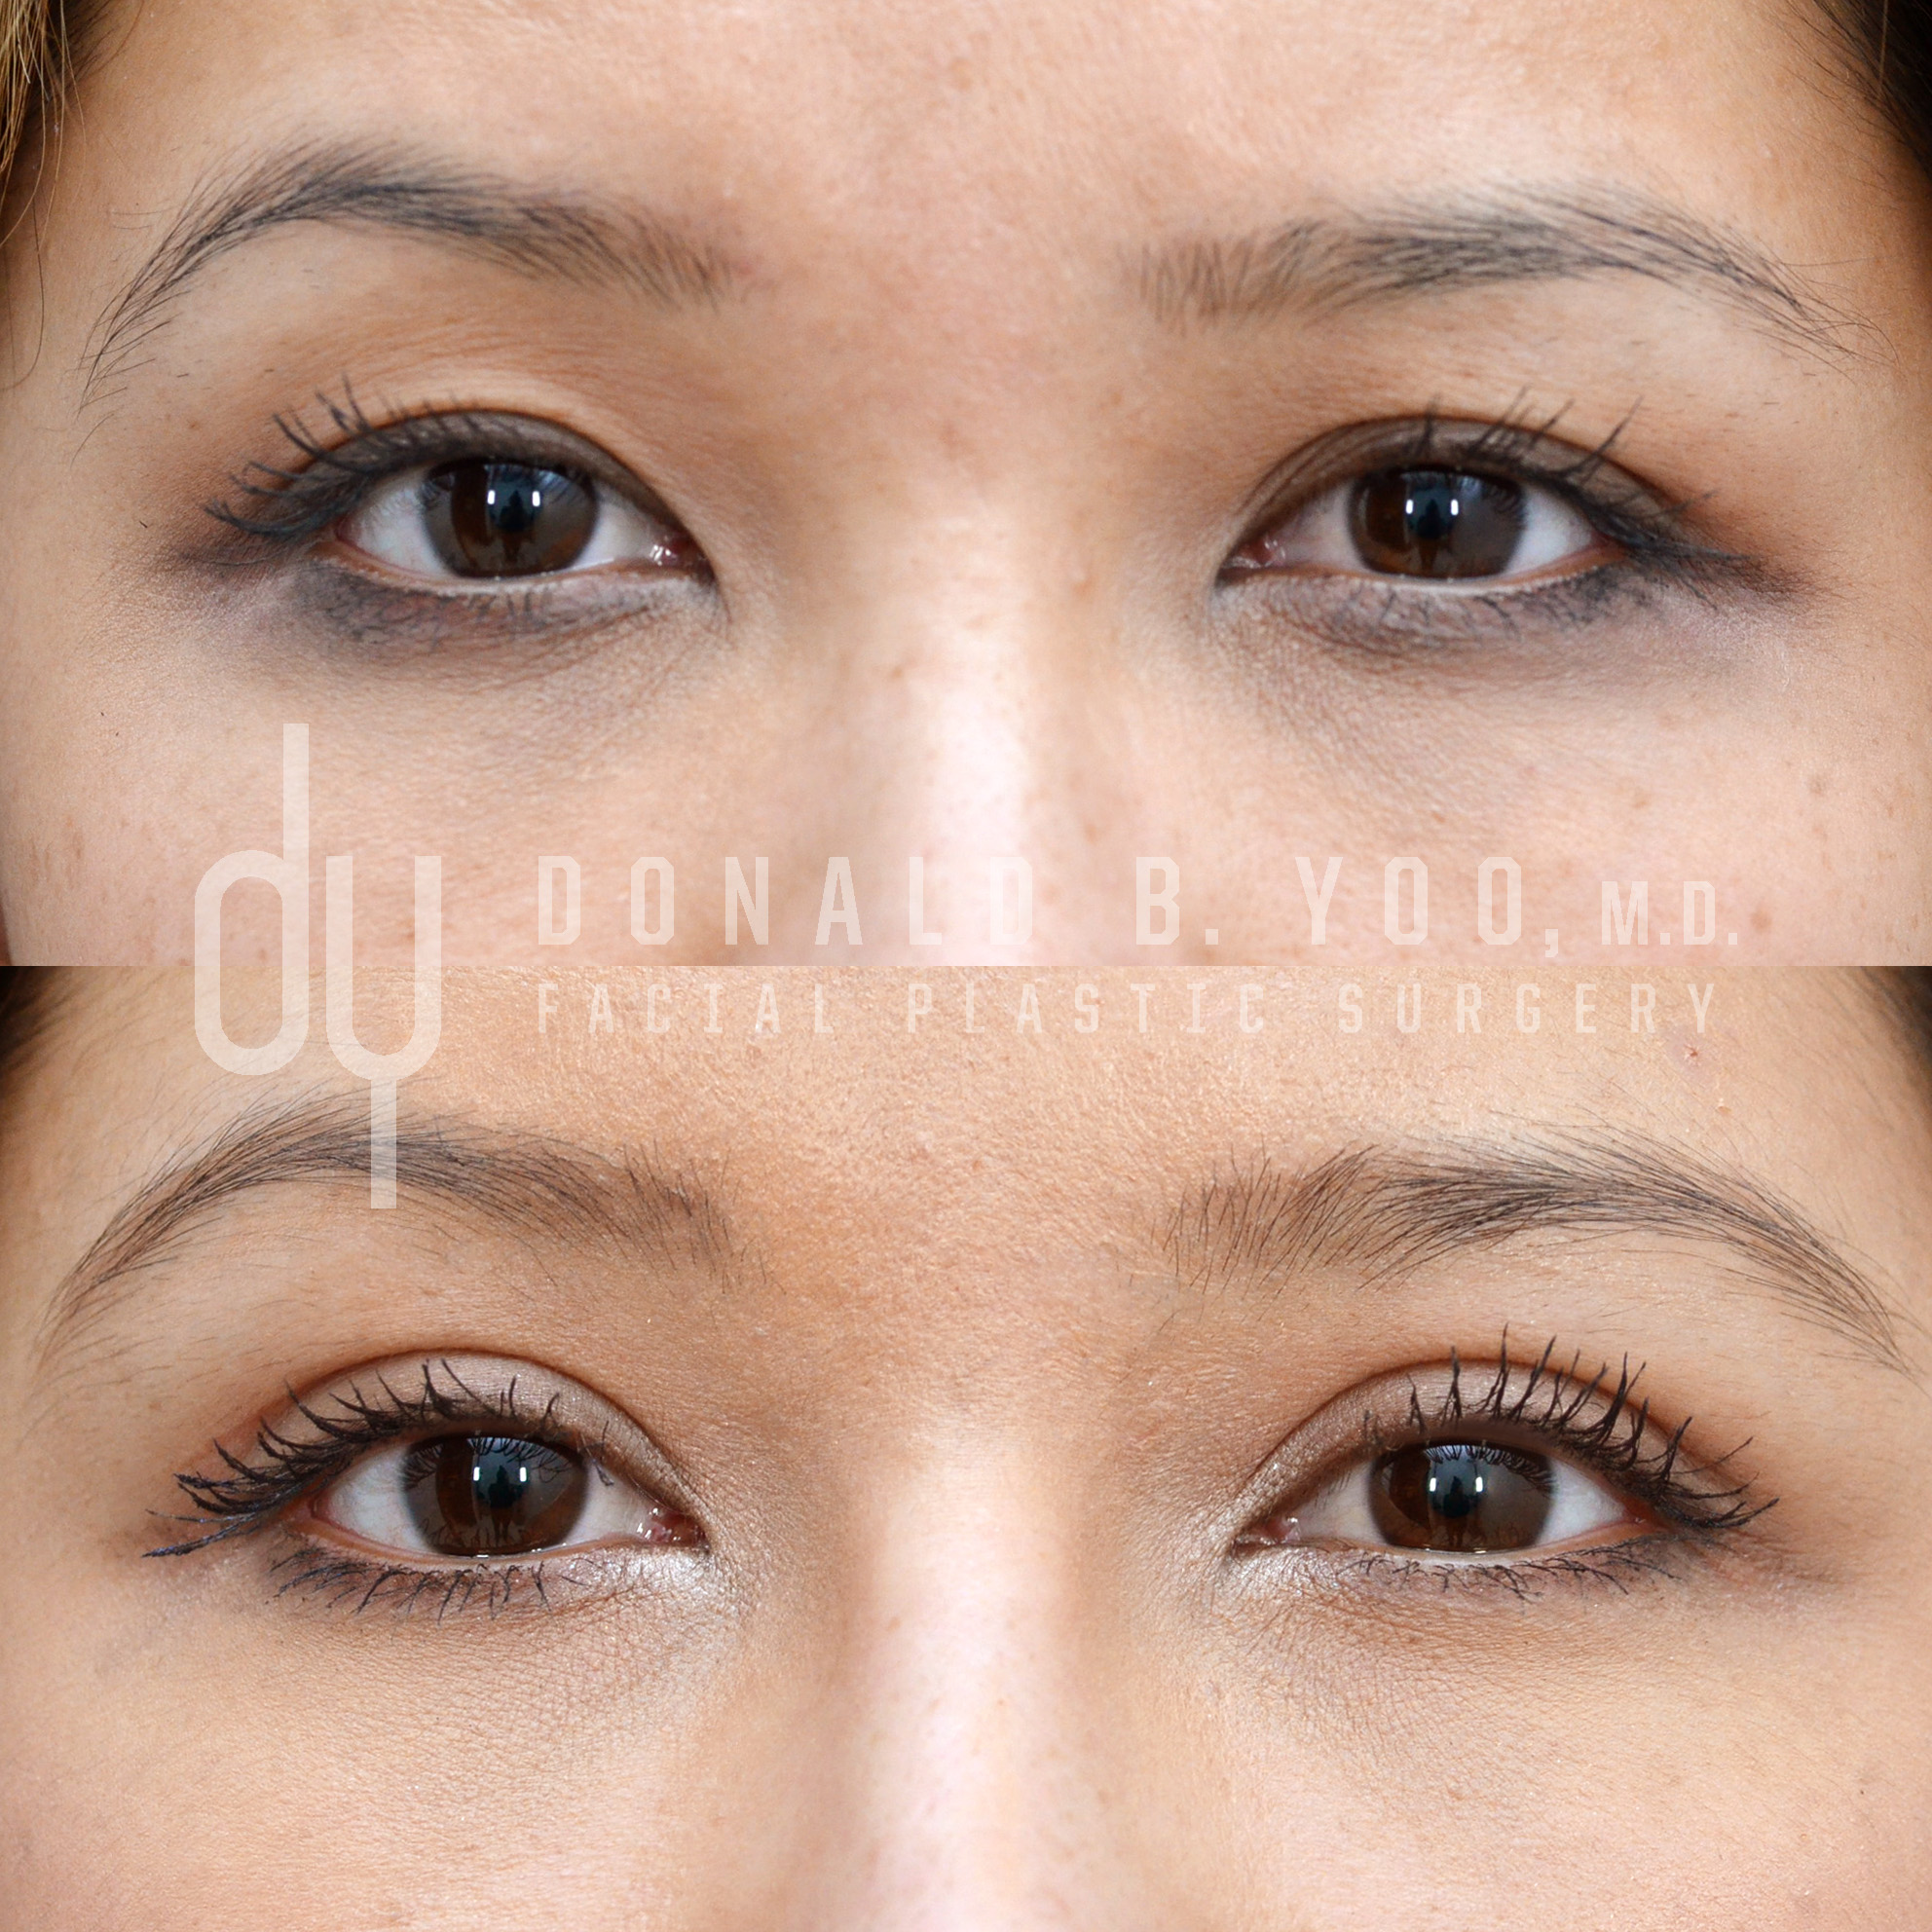 Beverly Hills Facial Plastic Surgery – Donald B. Yoo M.D. - Services:  Surgical Fat Pad Removal